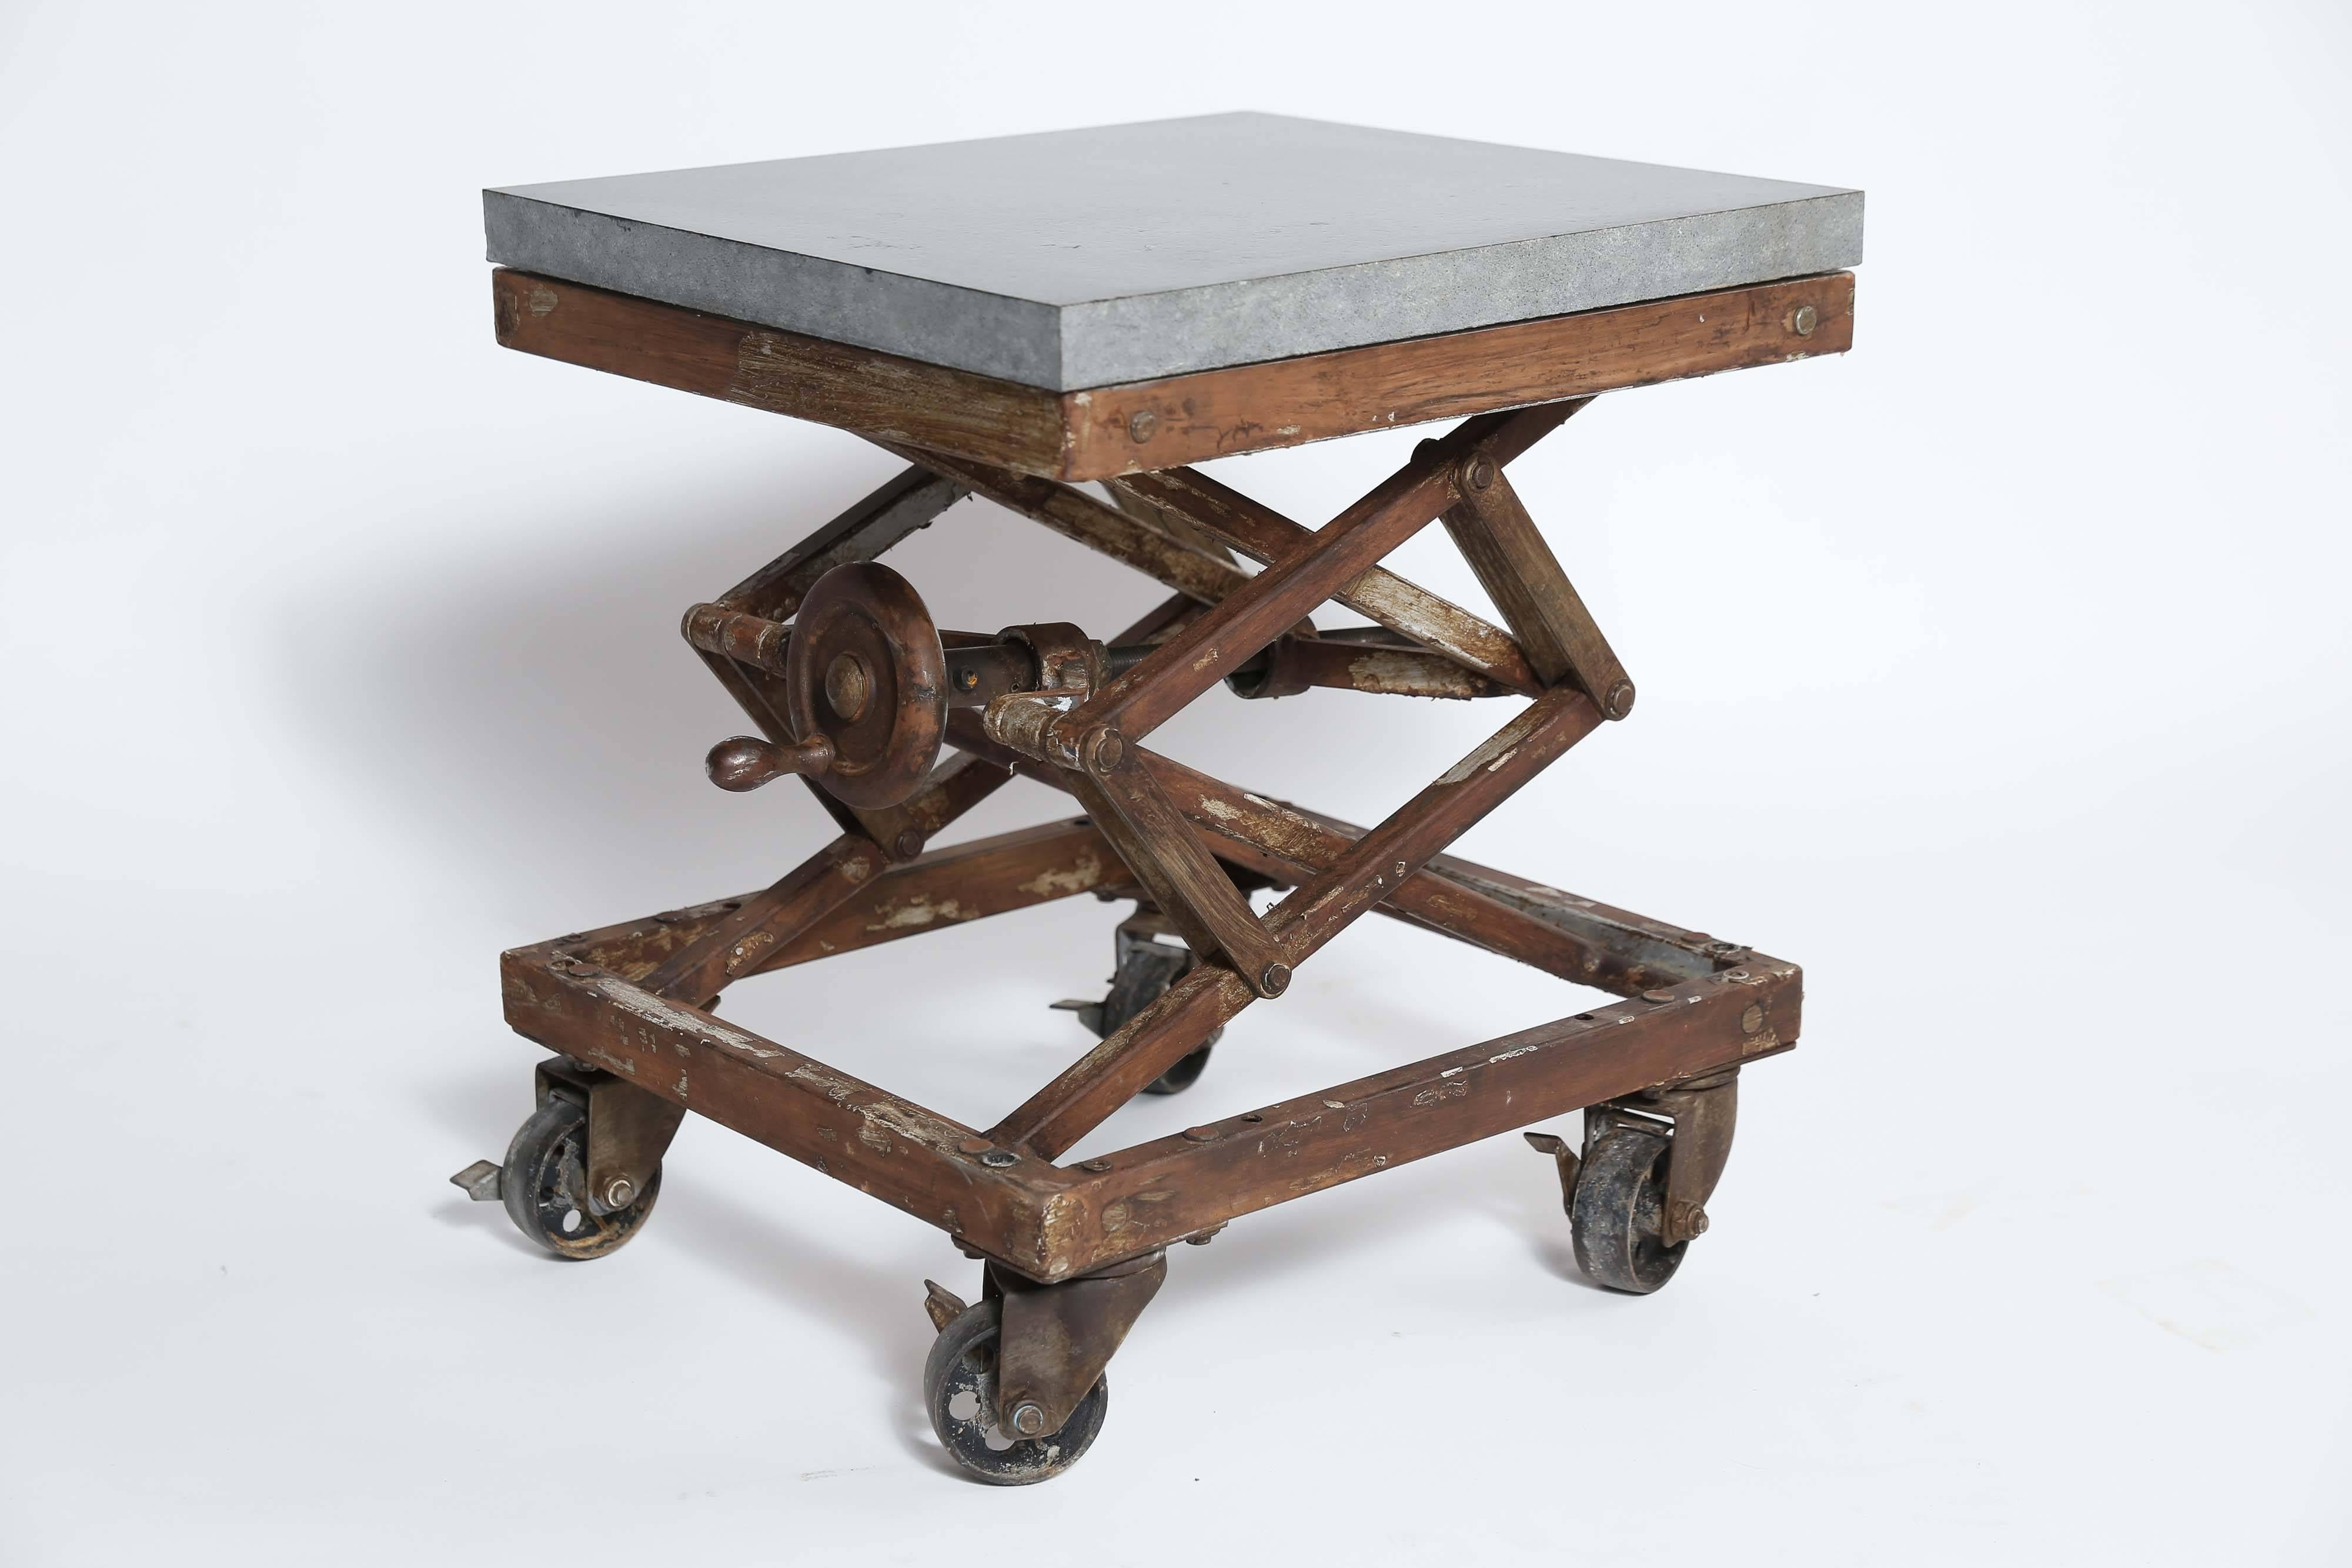 A vintage scissor lift becomes a side table or a high/low stool. Made of iron with a stone top, it's height ranges from 12 inches to 26 inches making it as versatile as it is cool. With locking wheels and a side crank. Two available.